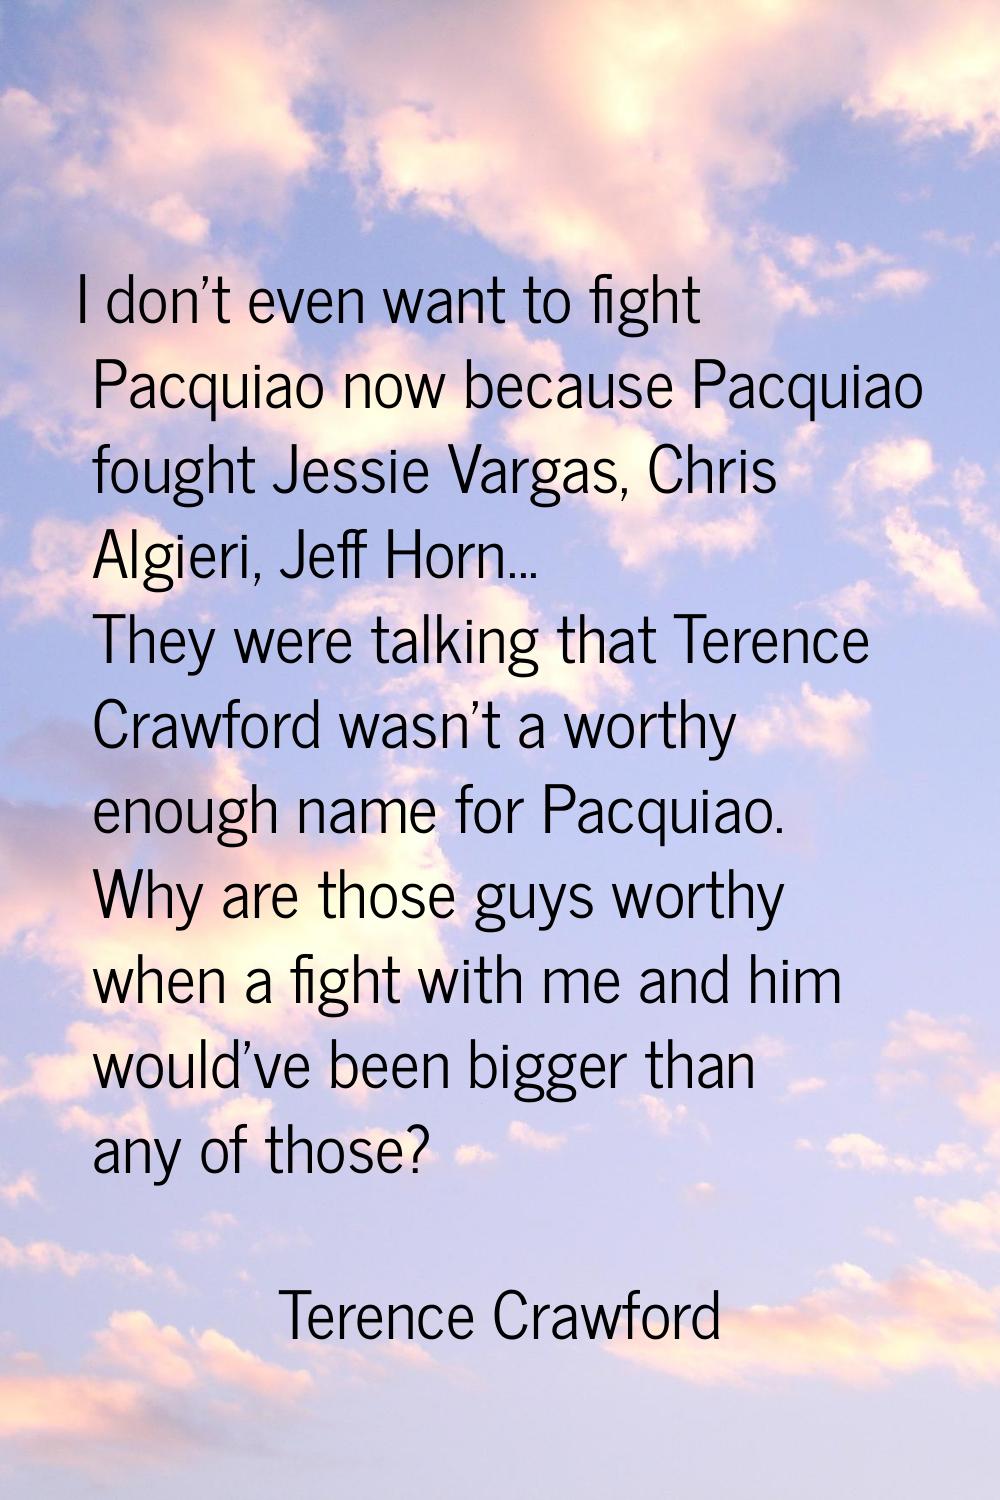 I don't even want to fight Pacquiao now because Pacquiao fought Jessie Vargas, Chris Algieri, Jeff 